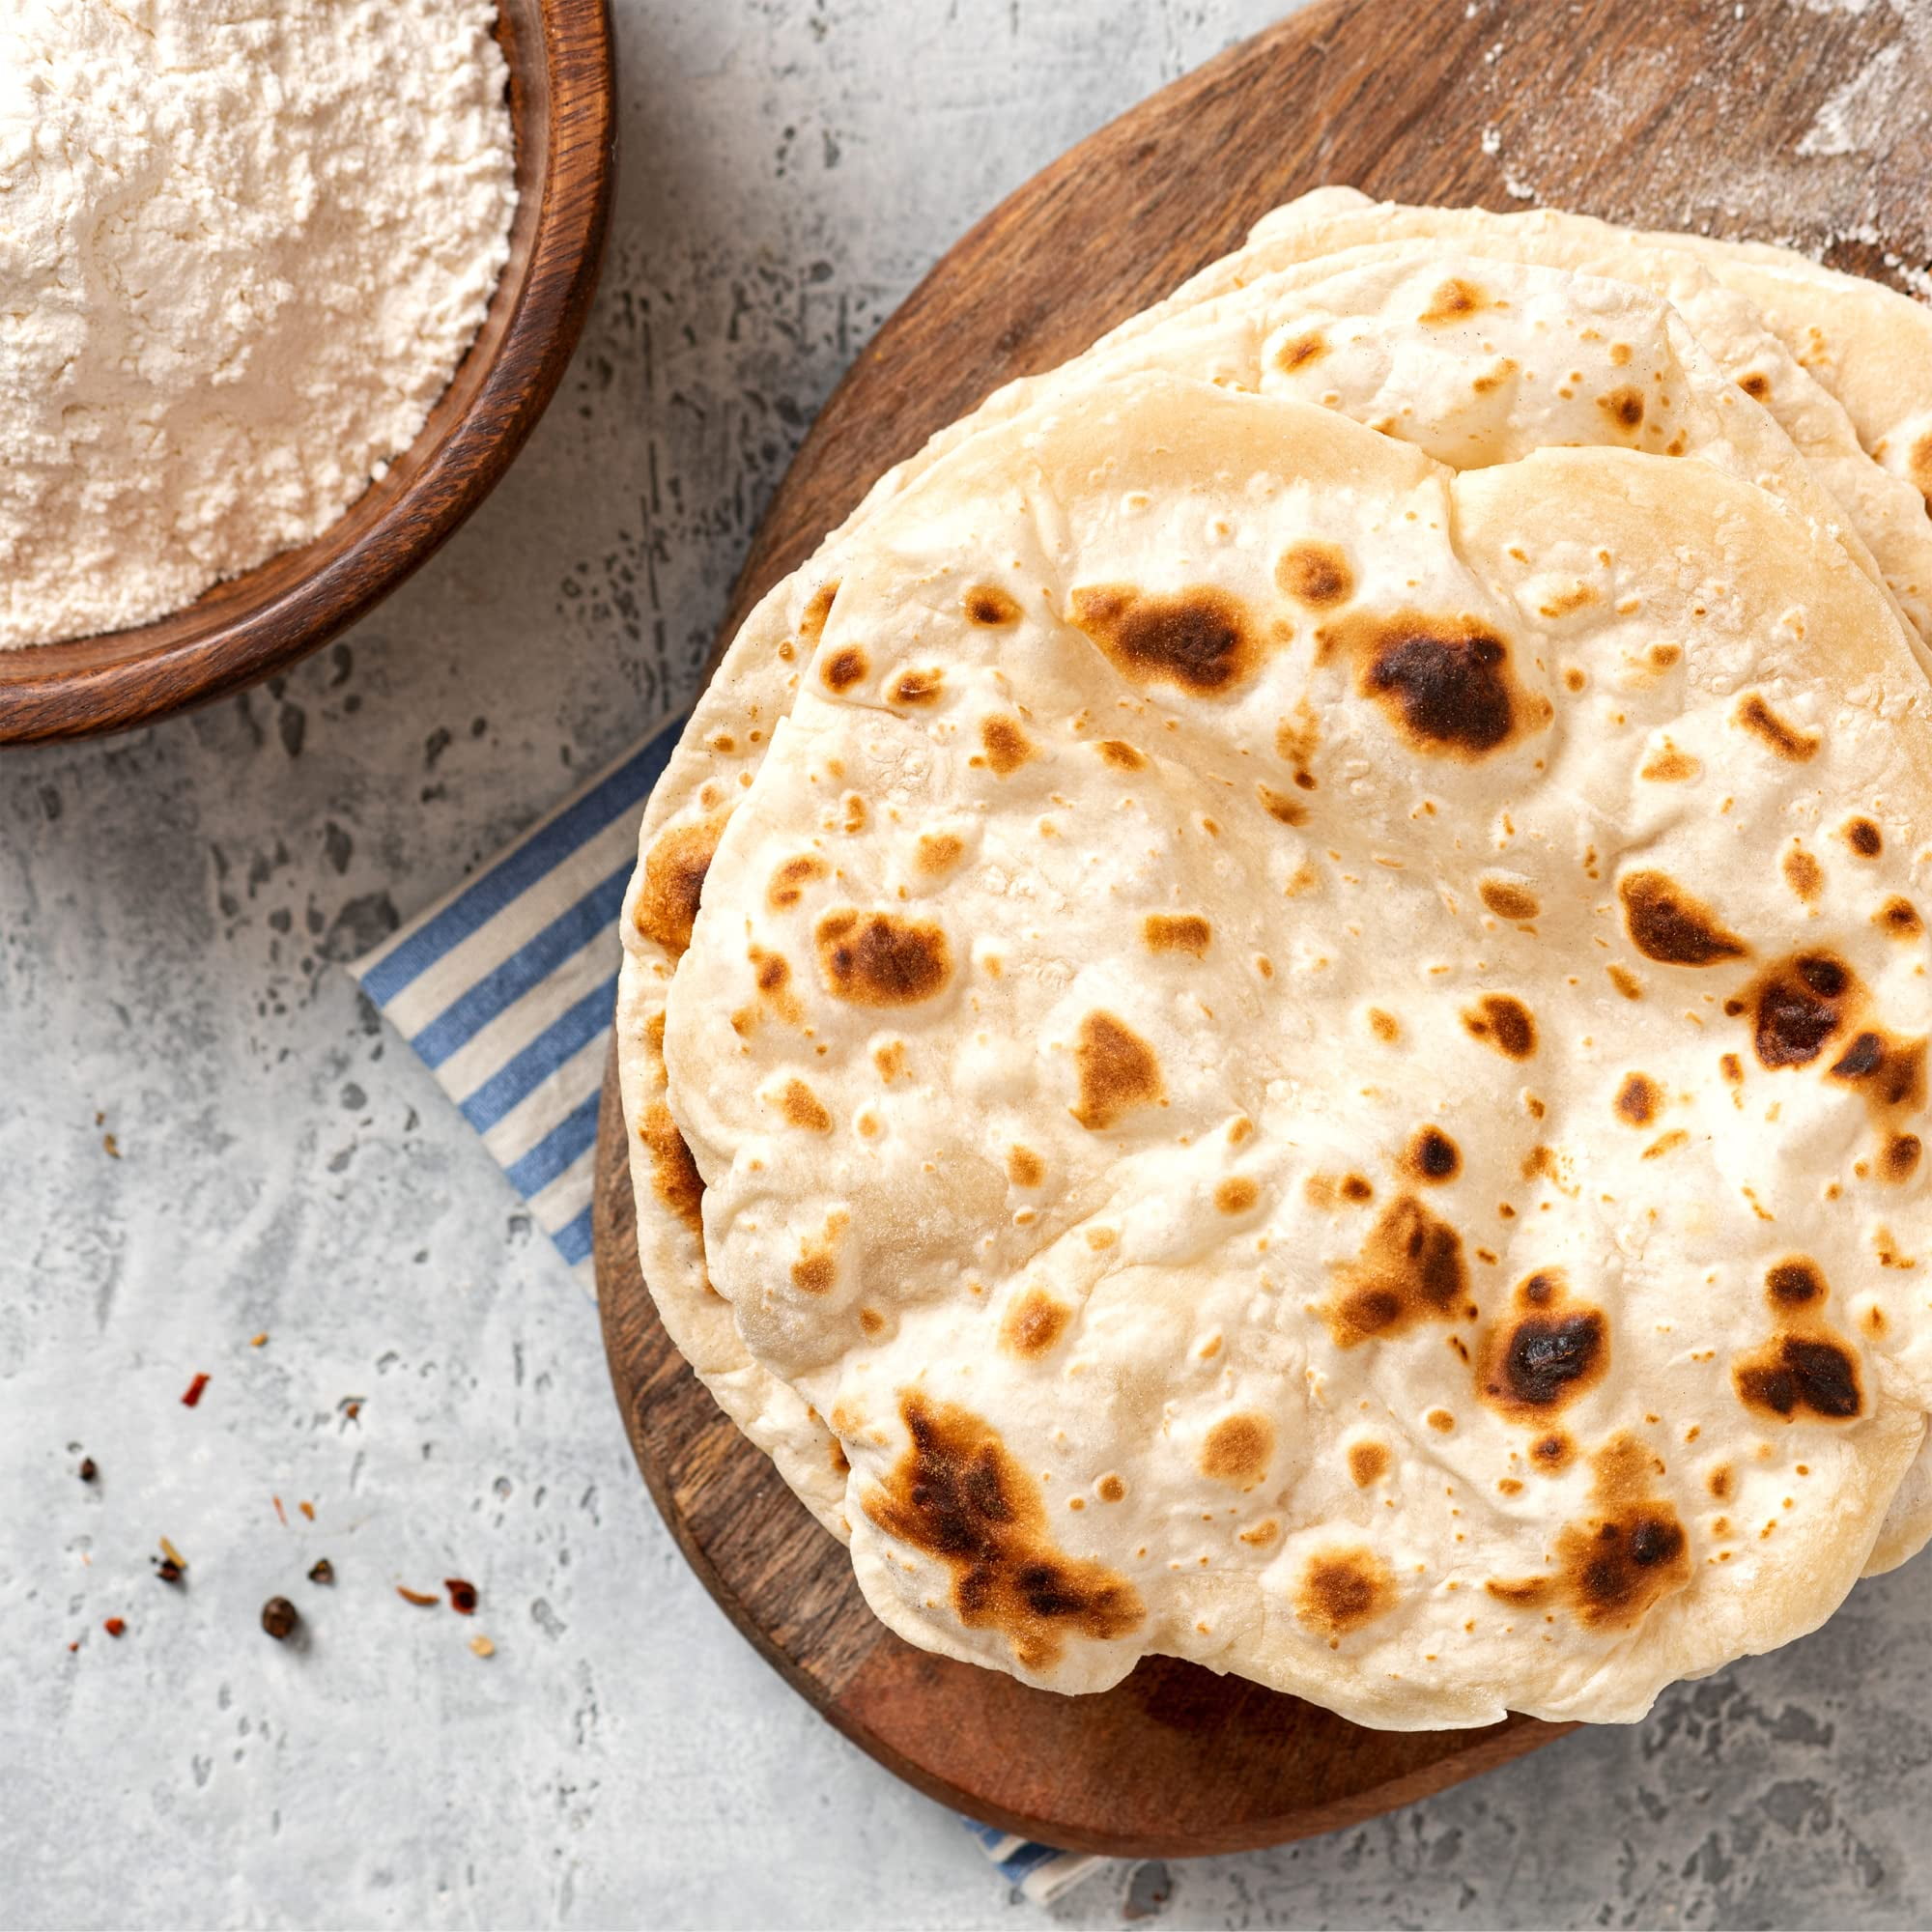 Indian Bread or Tawa Roti Made from Whole Wheat Flour or Refind Flour Dough  Stock Photo - Image of capati, atta: 190429504